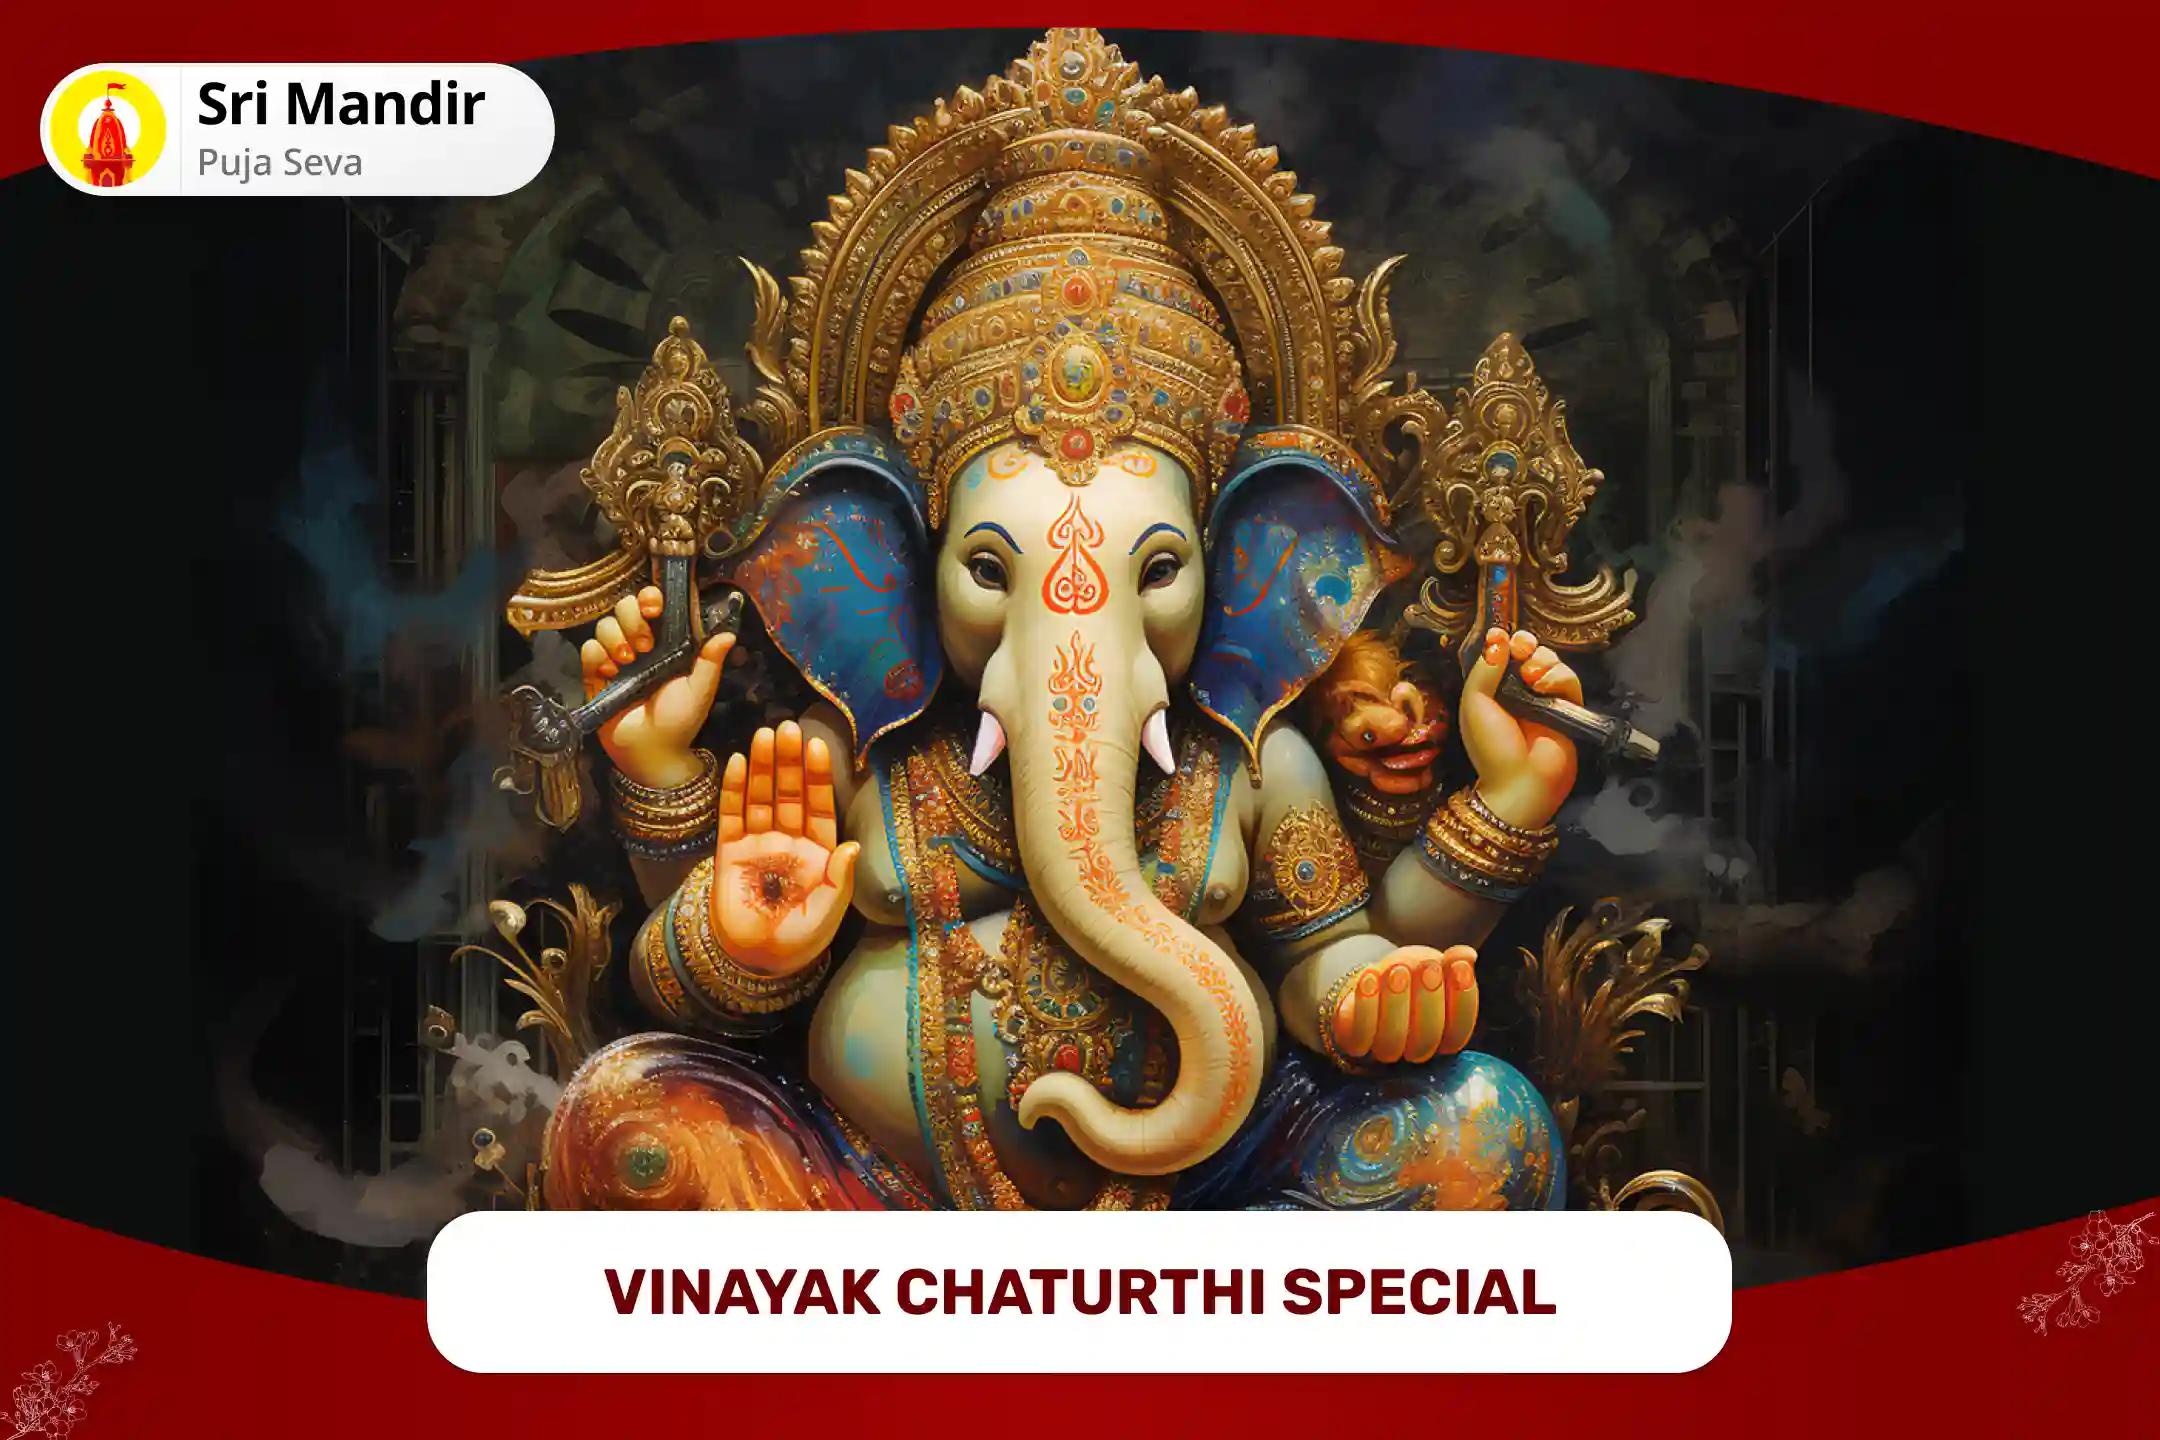 For Removal of Obstacles and Fulfilment of Wishes Vinayak Chaturthi Special Ganesh Atharvashirsha Path, Abhishekam Puja and 1008 Sahasranamam Path